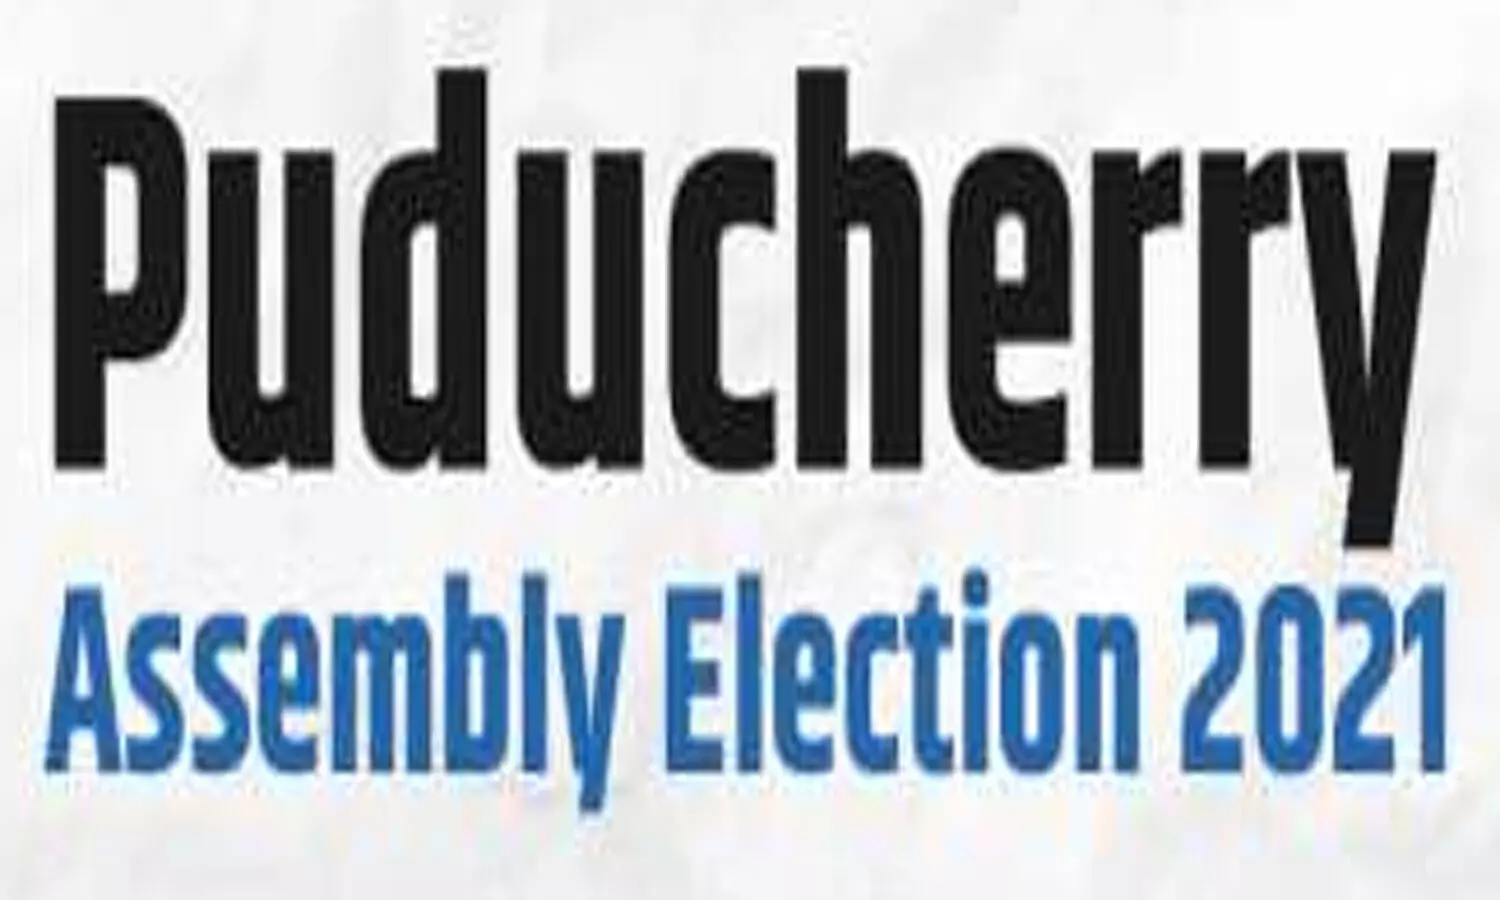 counting of votes has started in Puducherry and BJP has moved towards an unbeatable lead.